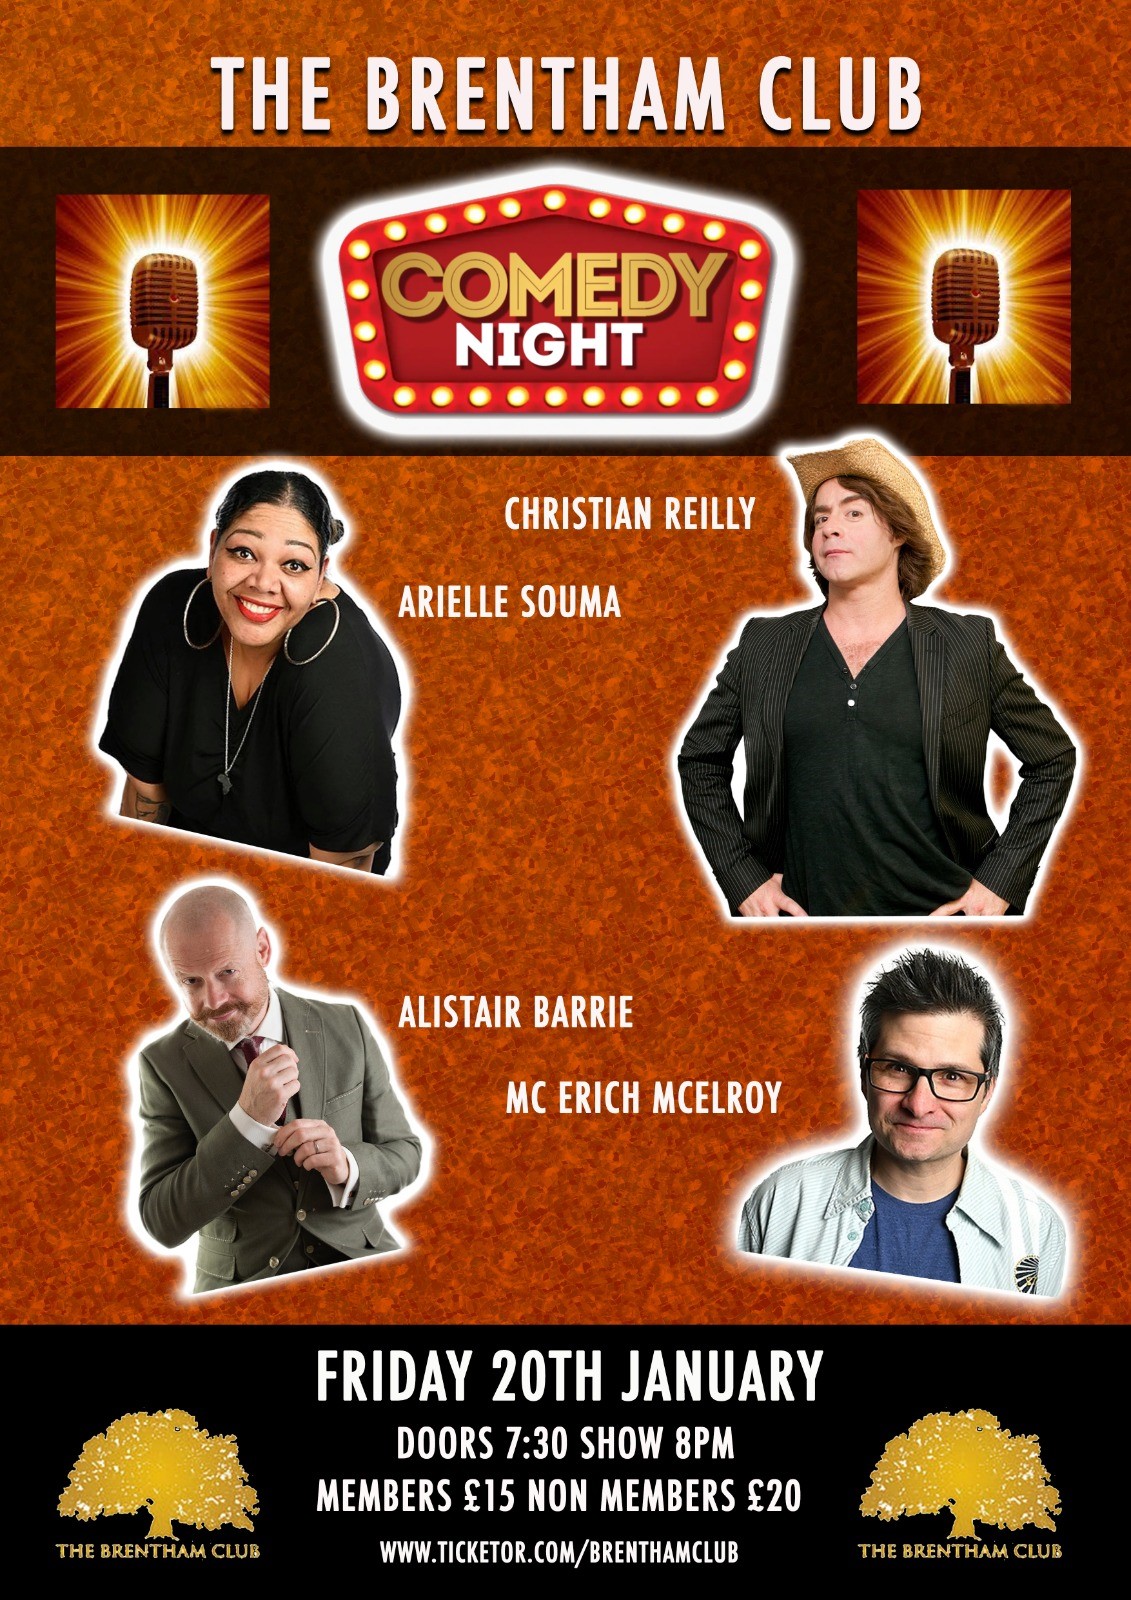 Comedy Night - show starts 8pm Christian Reilly, Alistair Barrie, Erich McElroy and Arielle Souma on Jan 20, 20:00@The Brentham Club - Buy tickets and Get information on Brenthamclub.co.uk 